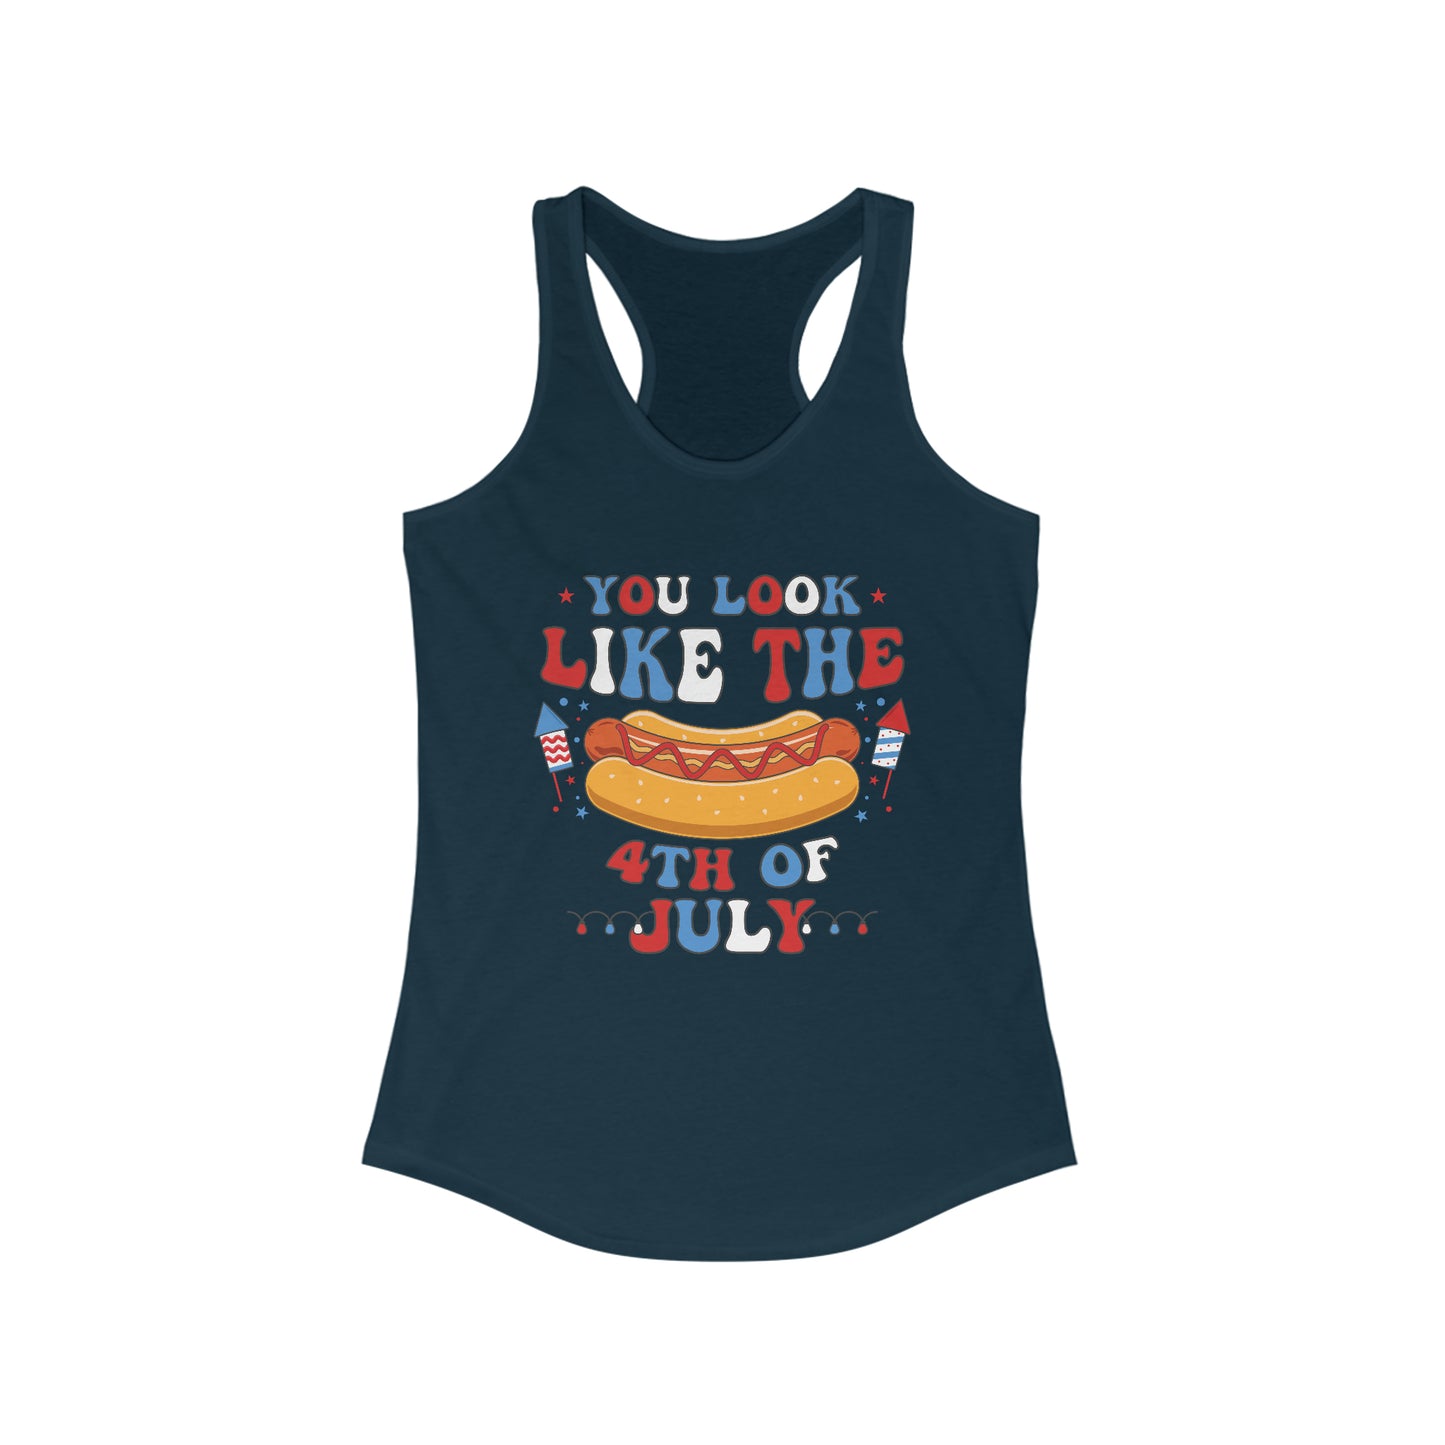 You Look Like The 4th of July Racerback Tank